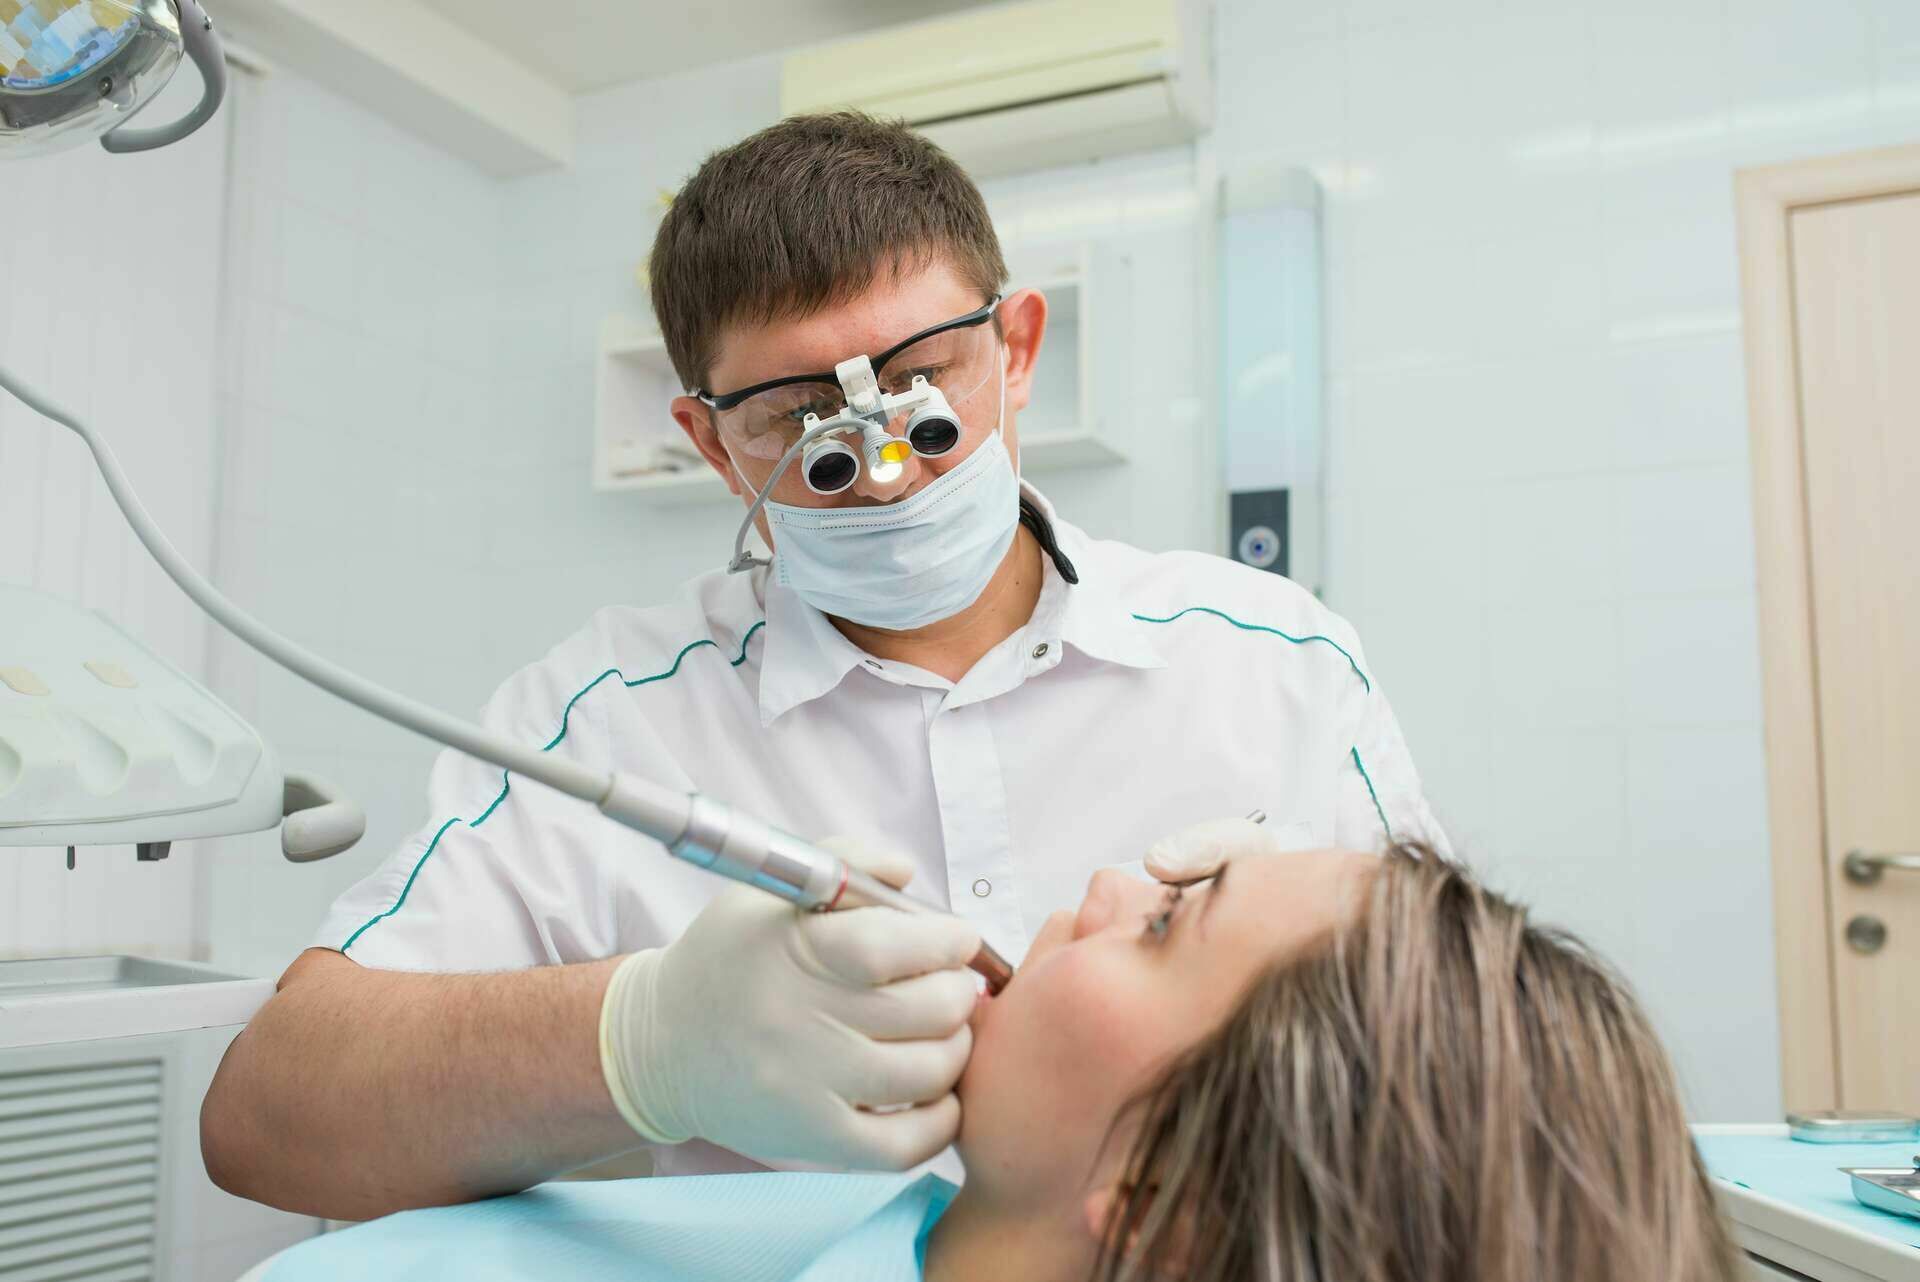 A hard nut to crack: What to expect from Russian dentistry in the era of sanctions